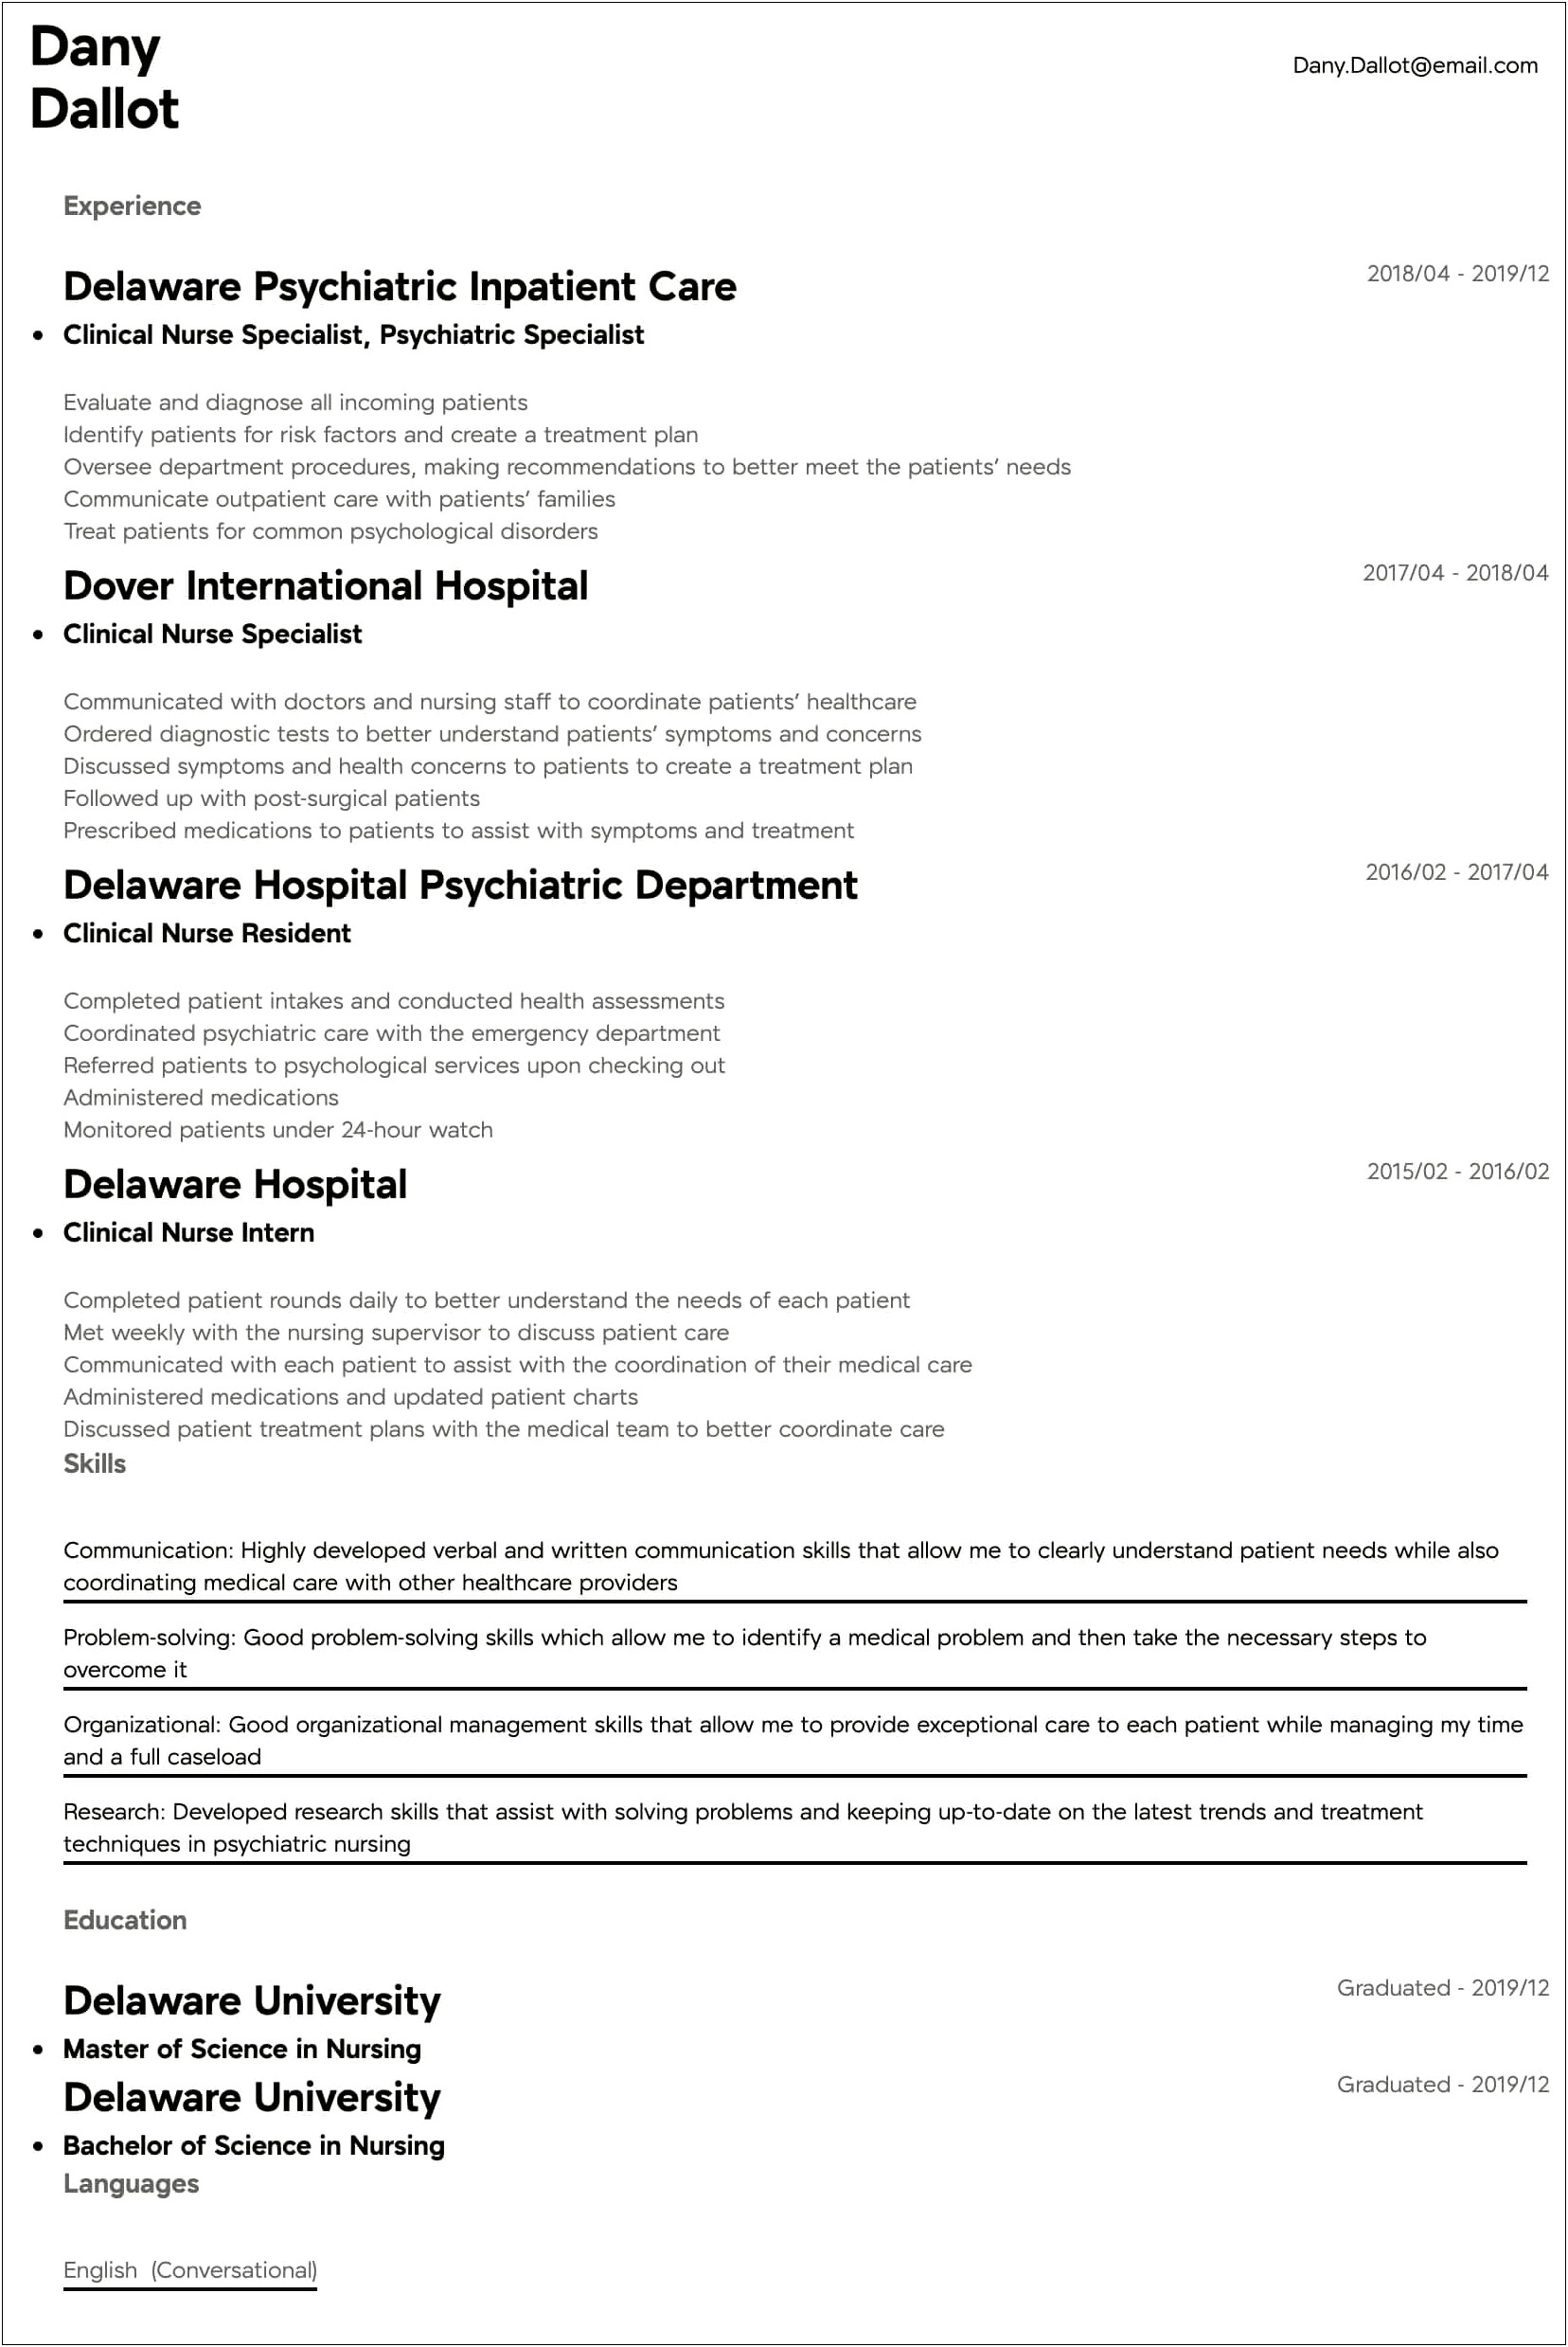 Resume Examples For Nurses 2018